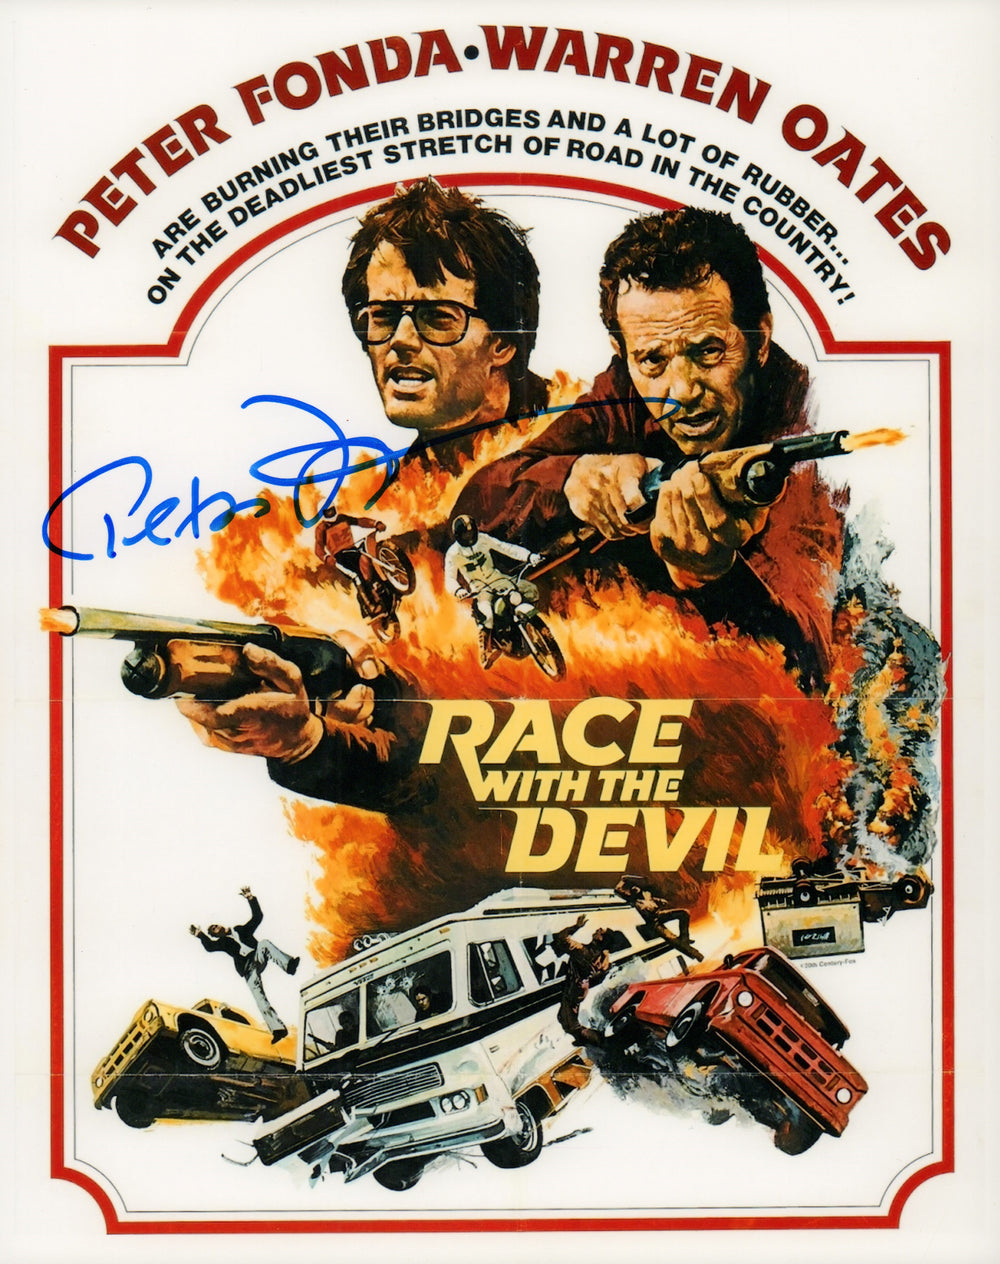 Peter Fonda as Roger Marsh in Race With the Devil Signed 8x10 Photo